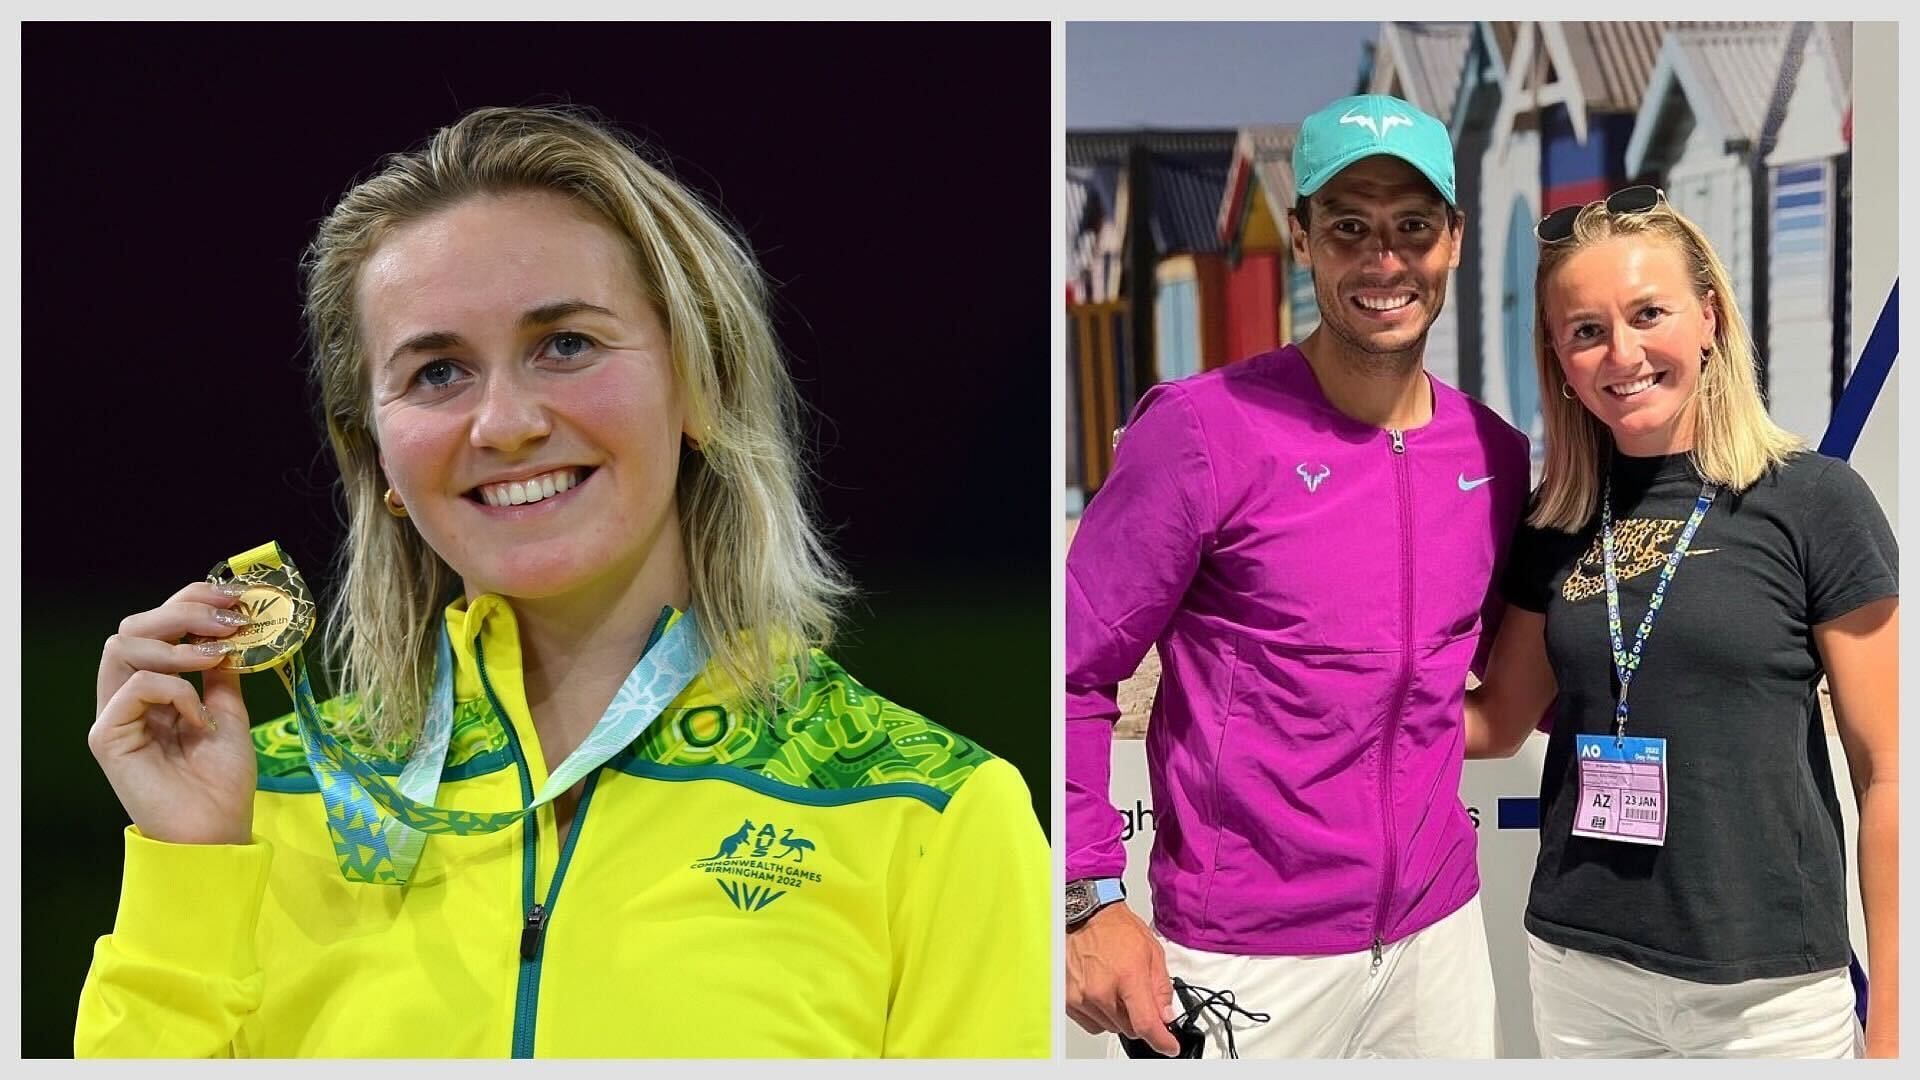 Ariarne Titmus has stated that Rafael Nadal is her favorite sportsperson.